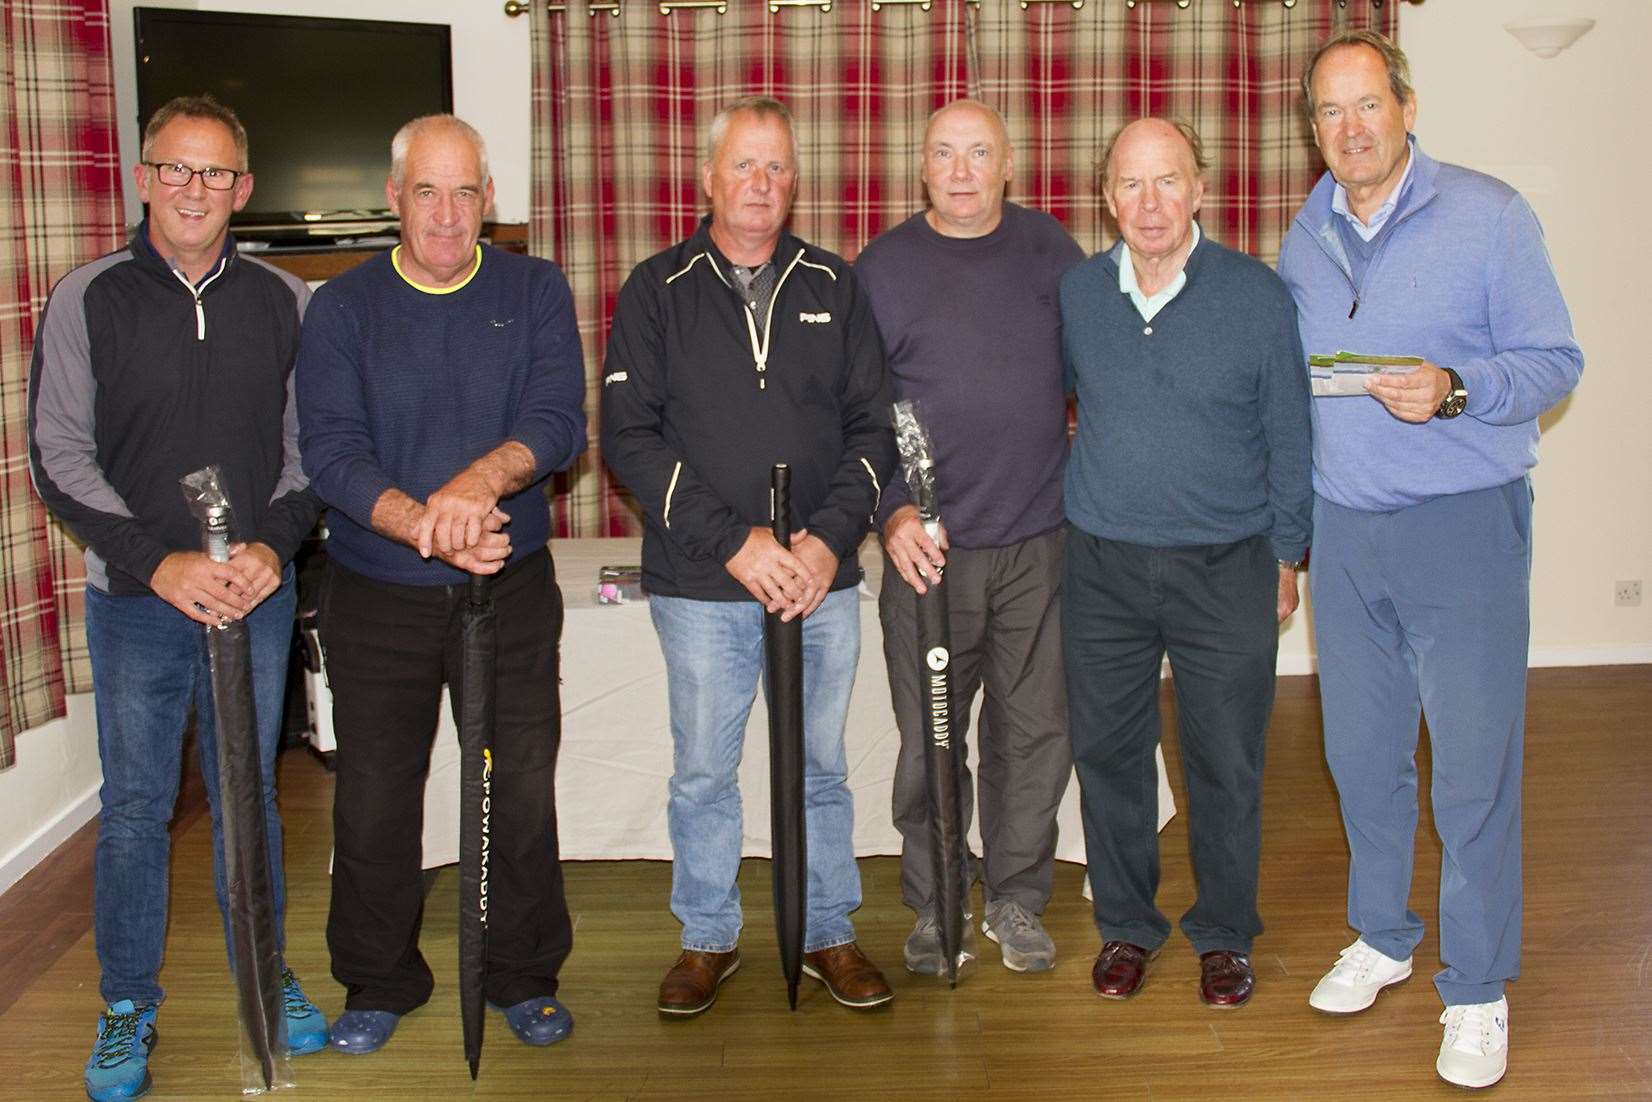 The winning team from the Bighouse Partnership Texas Scramble, (from left) John Nicolson, Grant Maxwell, Leslie Malcolm and Ian Farquhar, with Toby Ward and Nigel Hurst-Brown of the Bighouse Partnership.